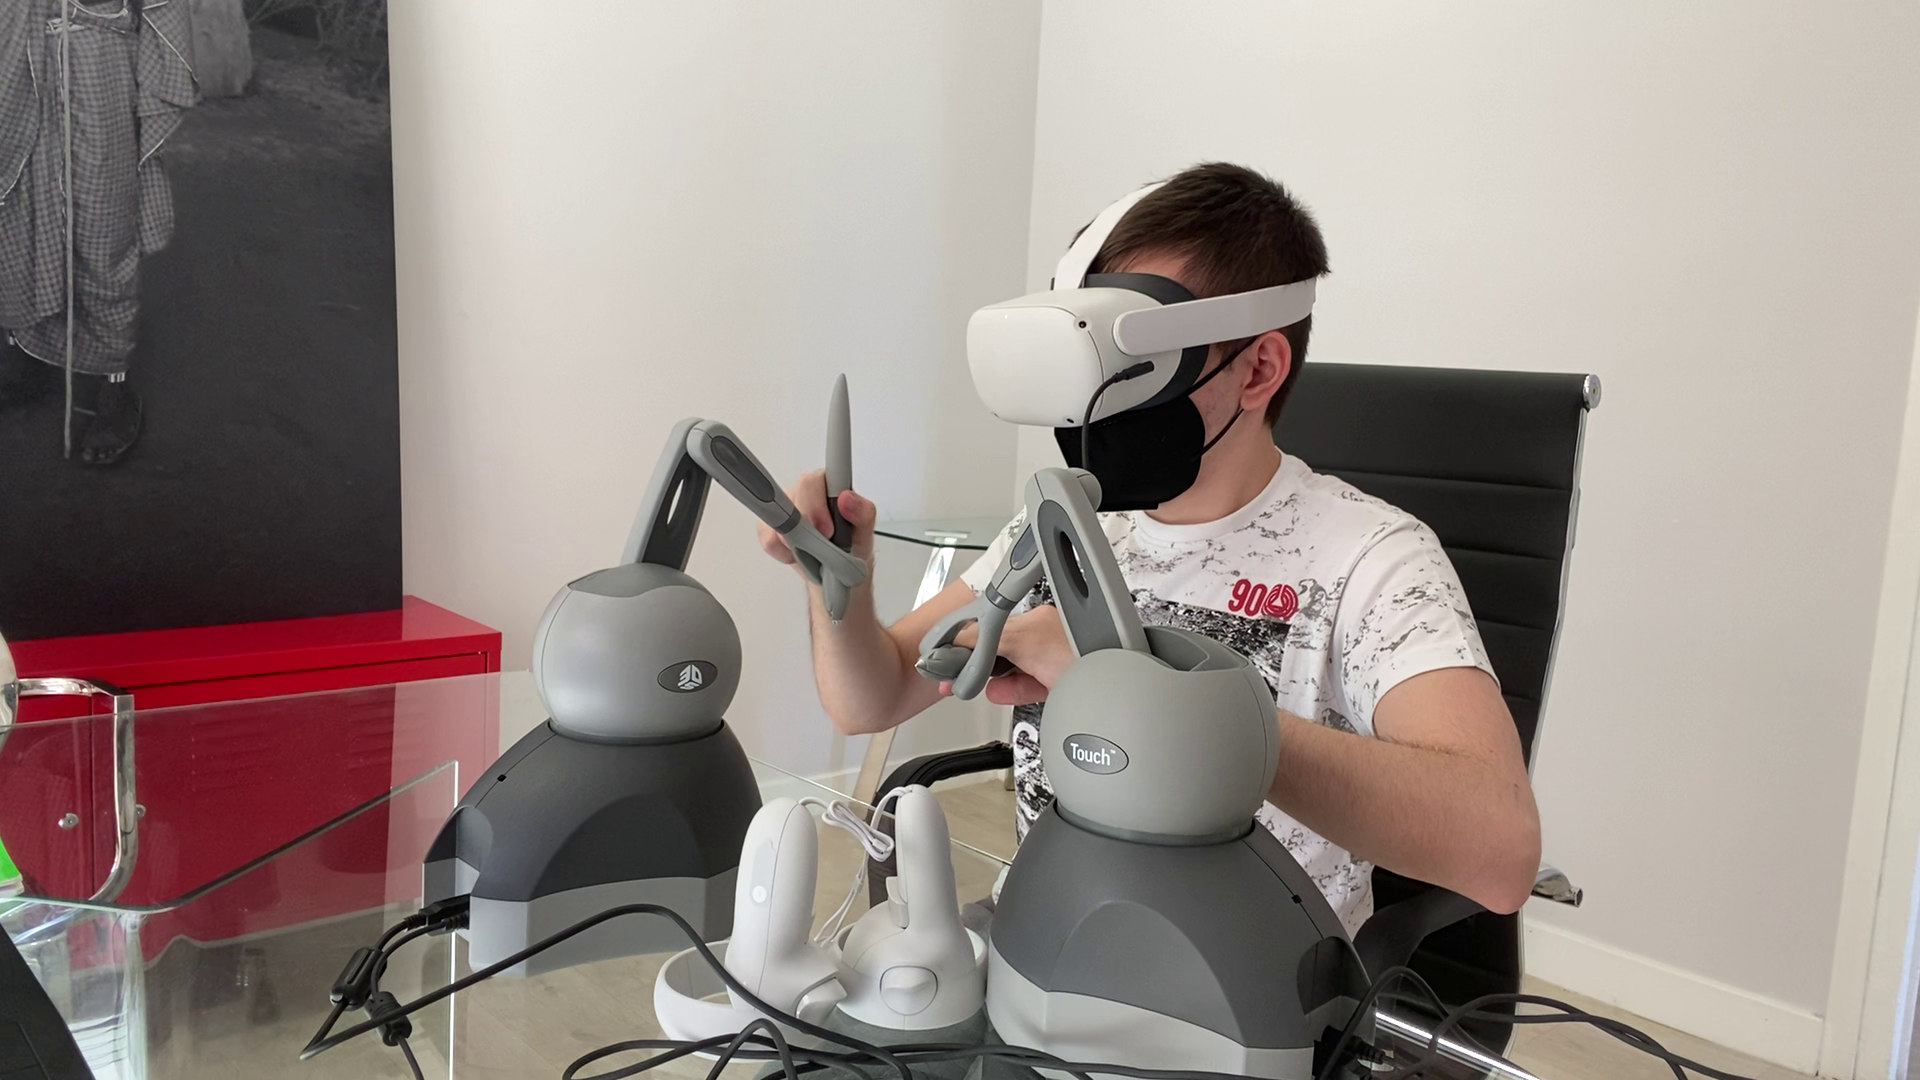 training with haptic devices